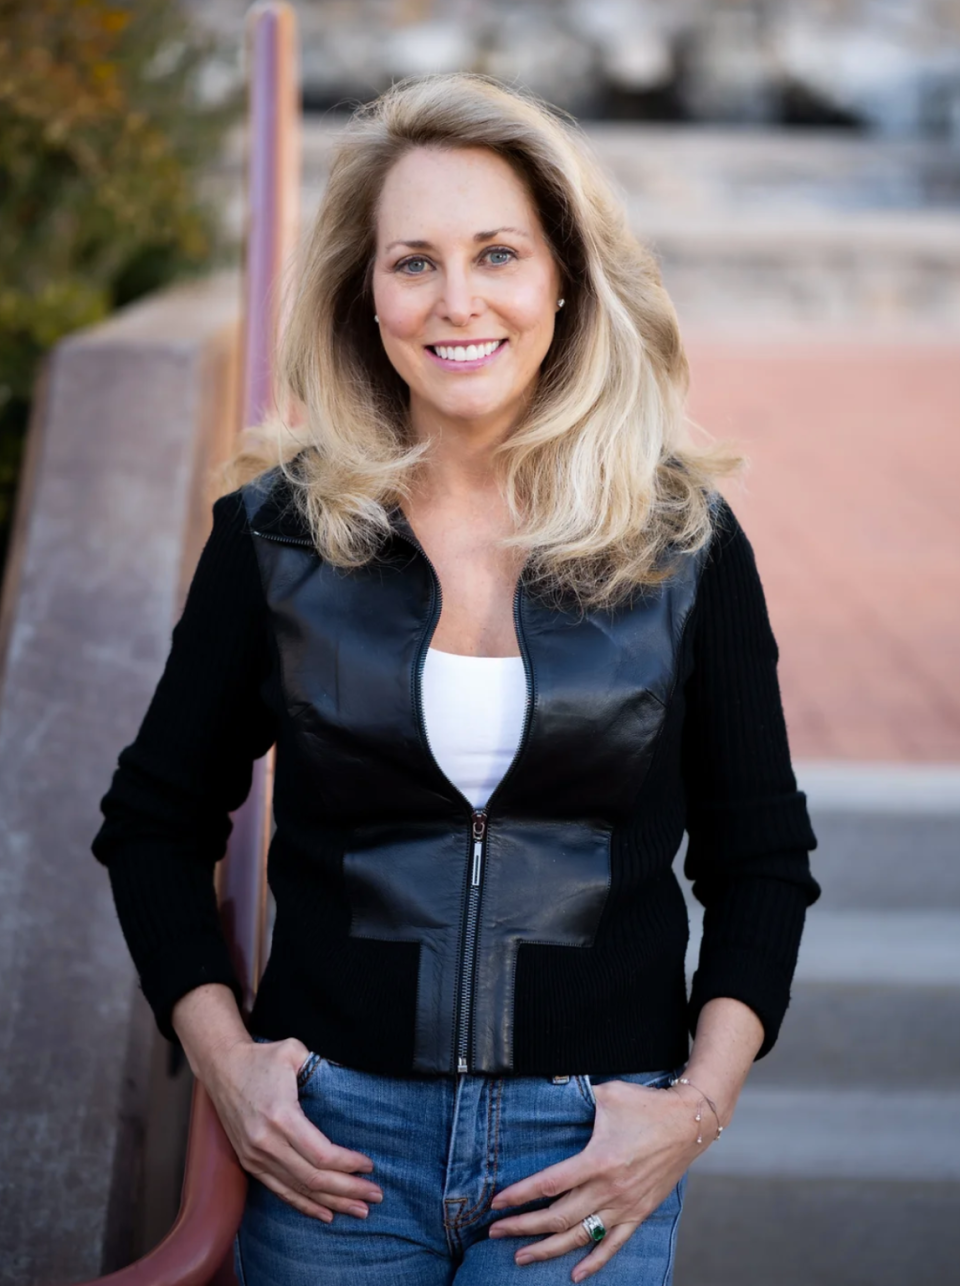 Shepard’s wife, former CIA operations officer-turned-author and Congressional candidate, files for WNMU expenses as “First Lady,” Shepard said. .